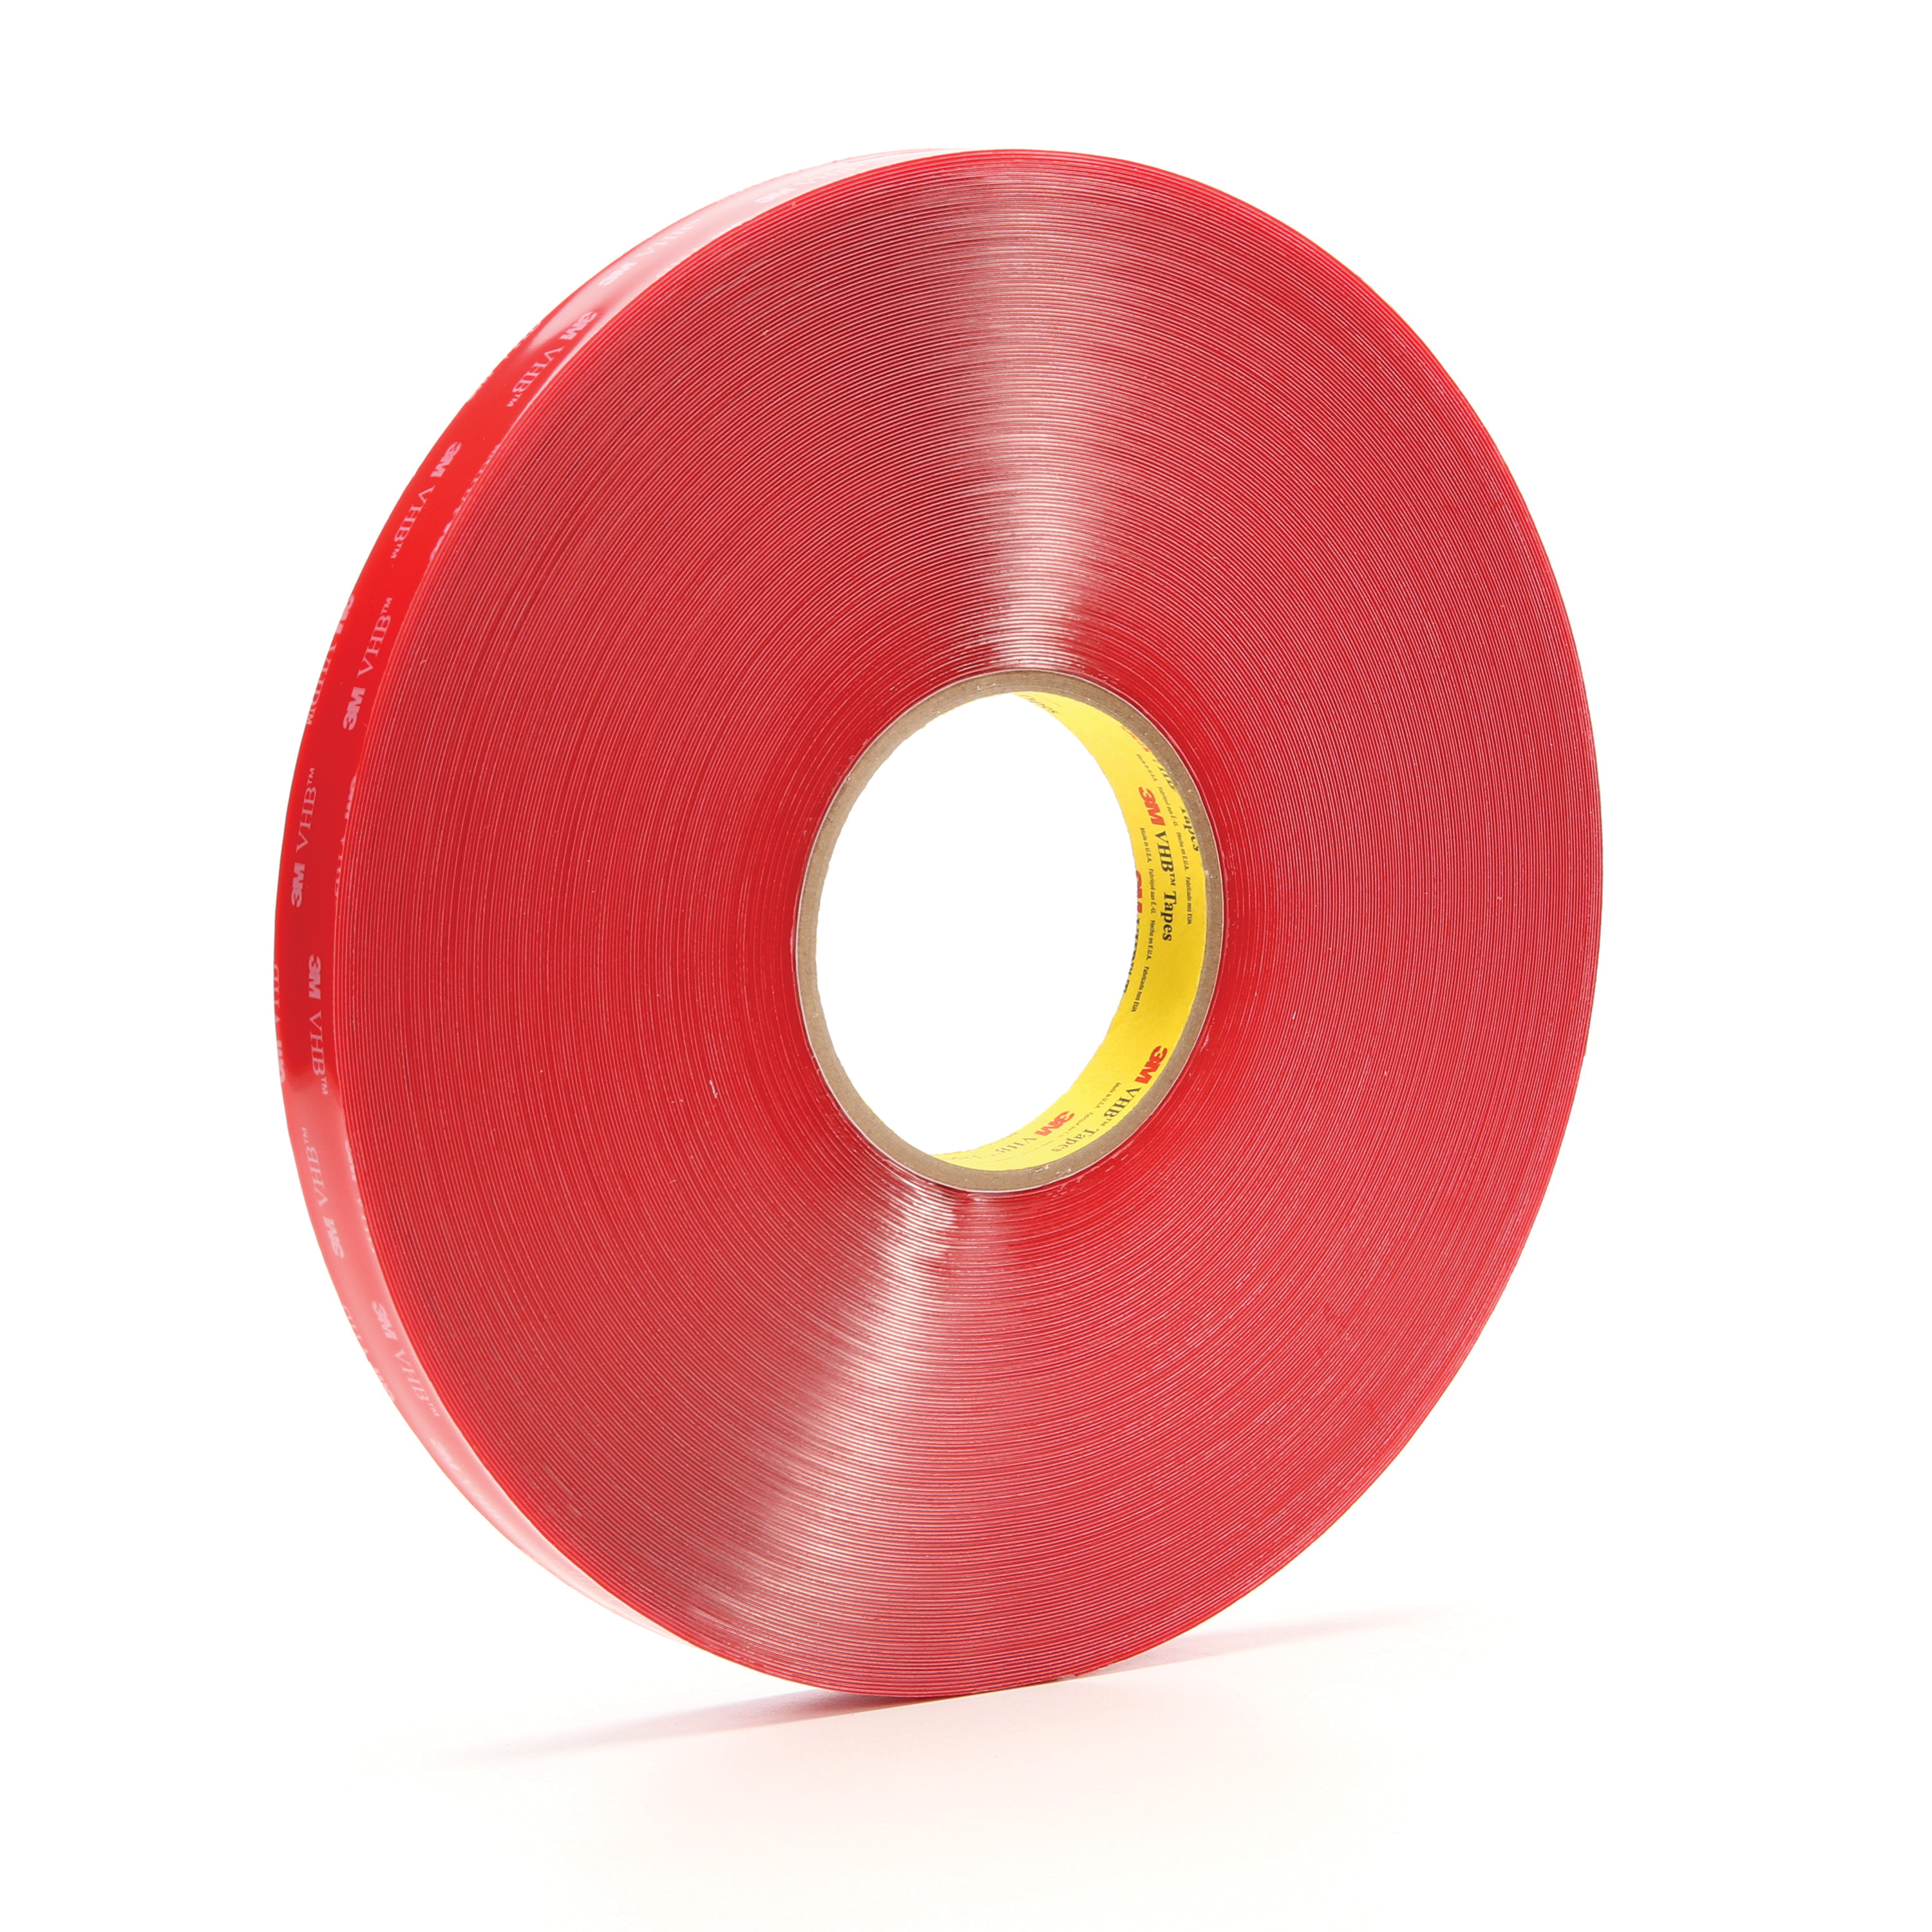 3m 5611 Double Sided Adhesive Acrylic Foam Tape Widely Used in